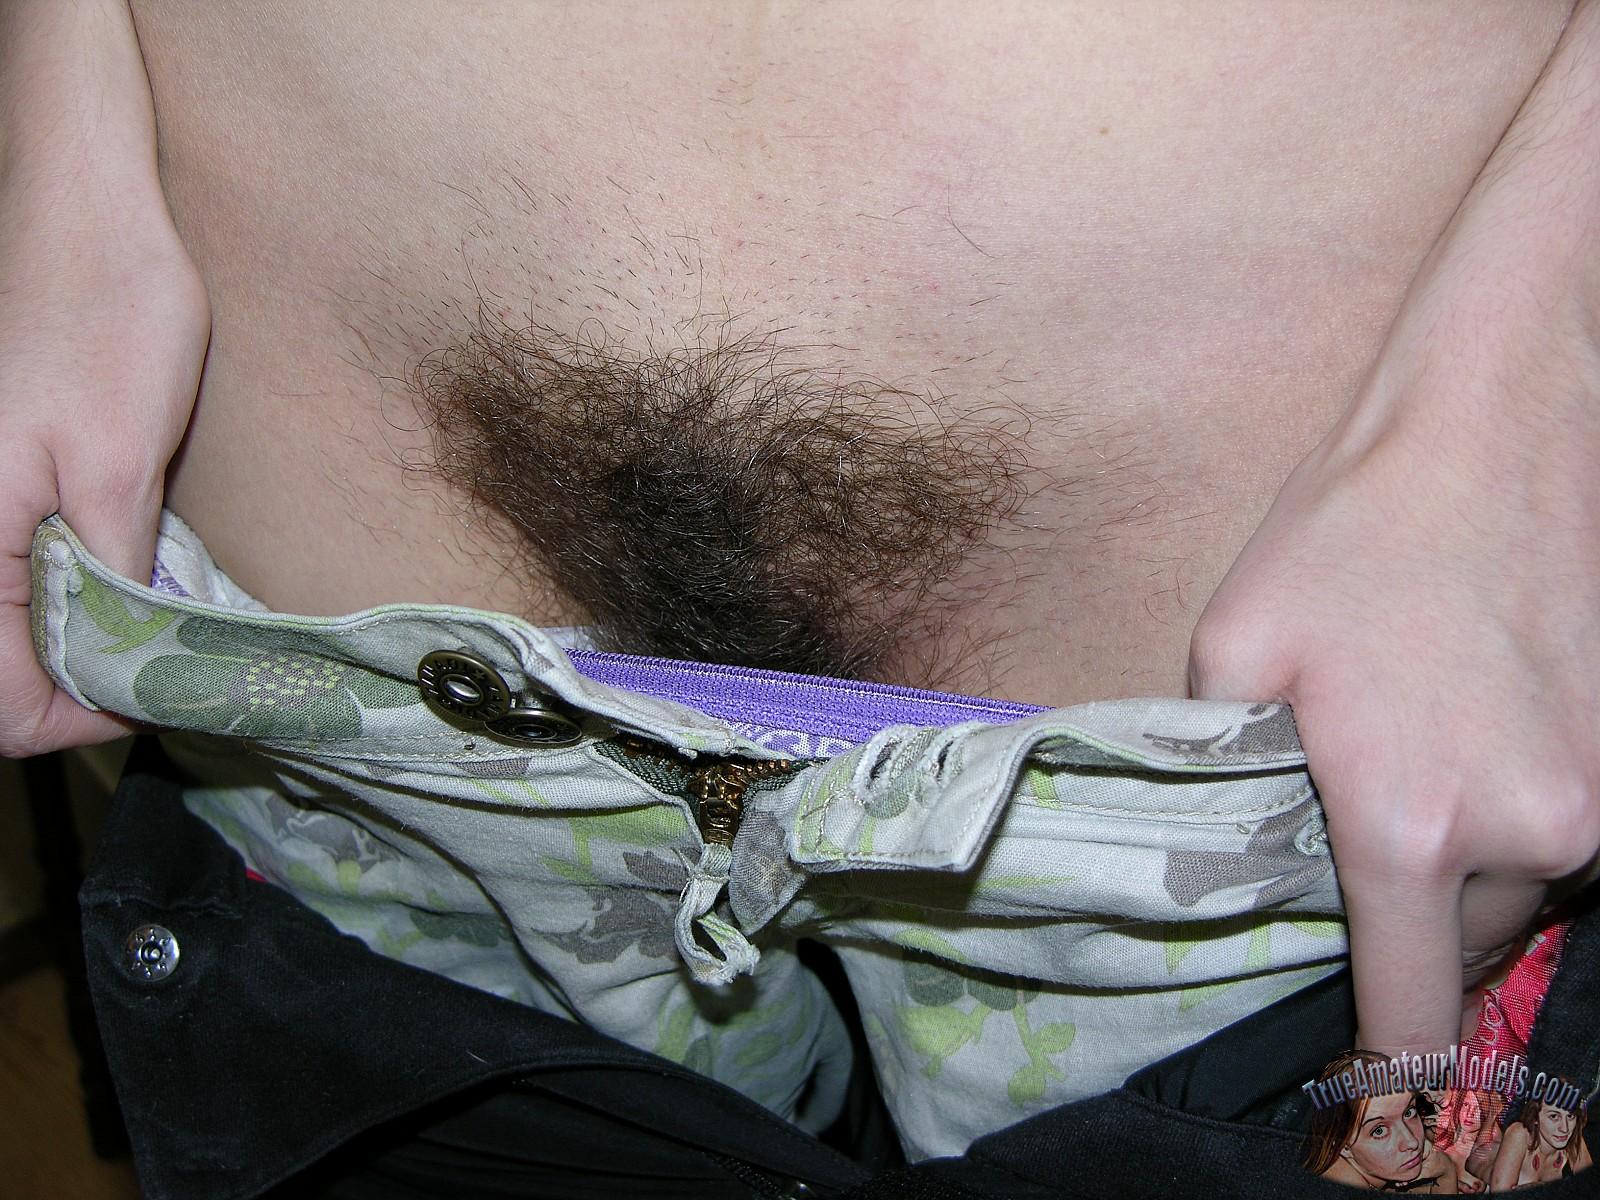 Amateur hairy hirsute nudist homemade photos Best Adult free images. Adult Picture